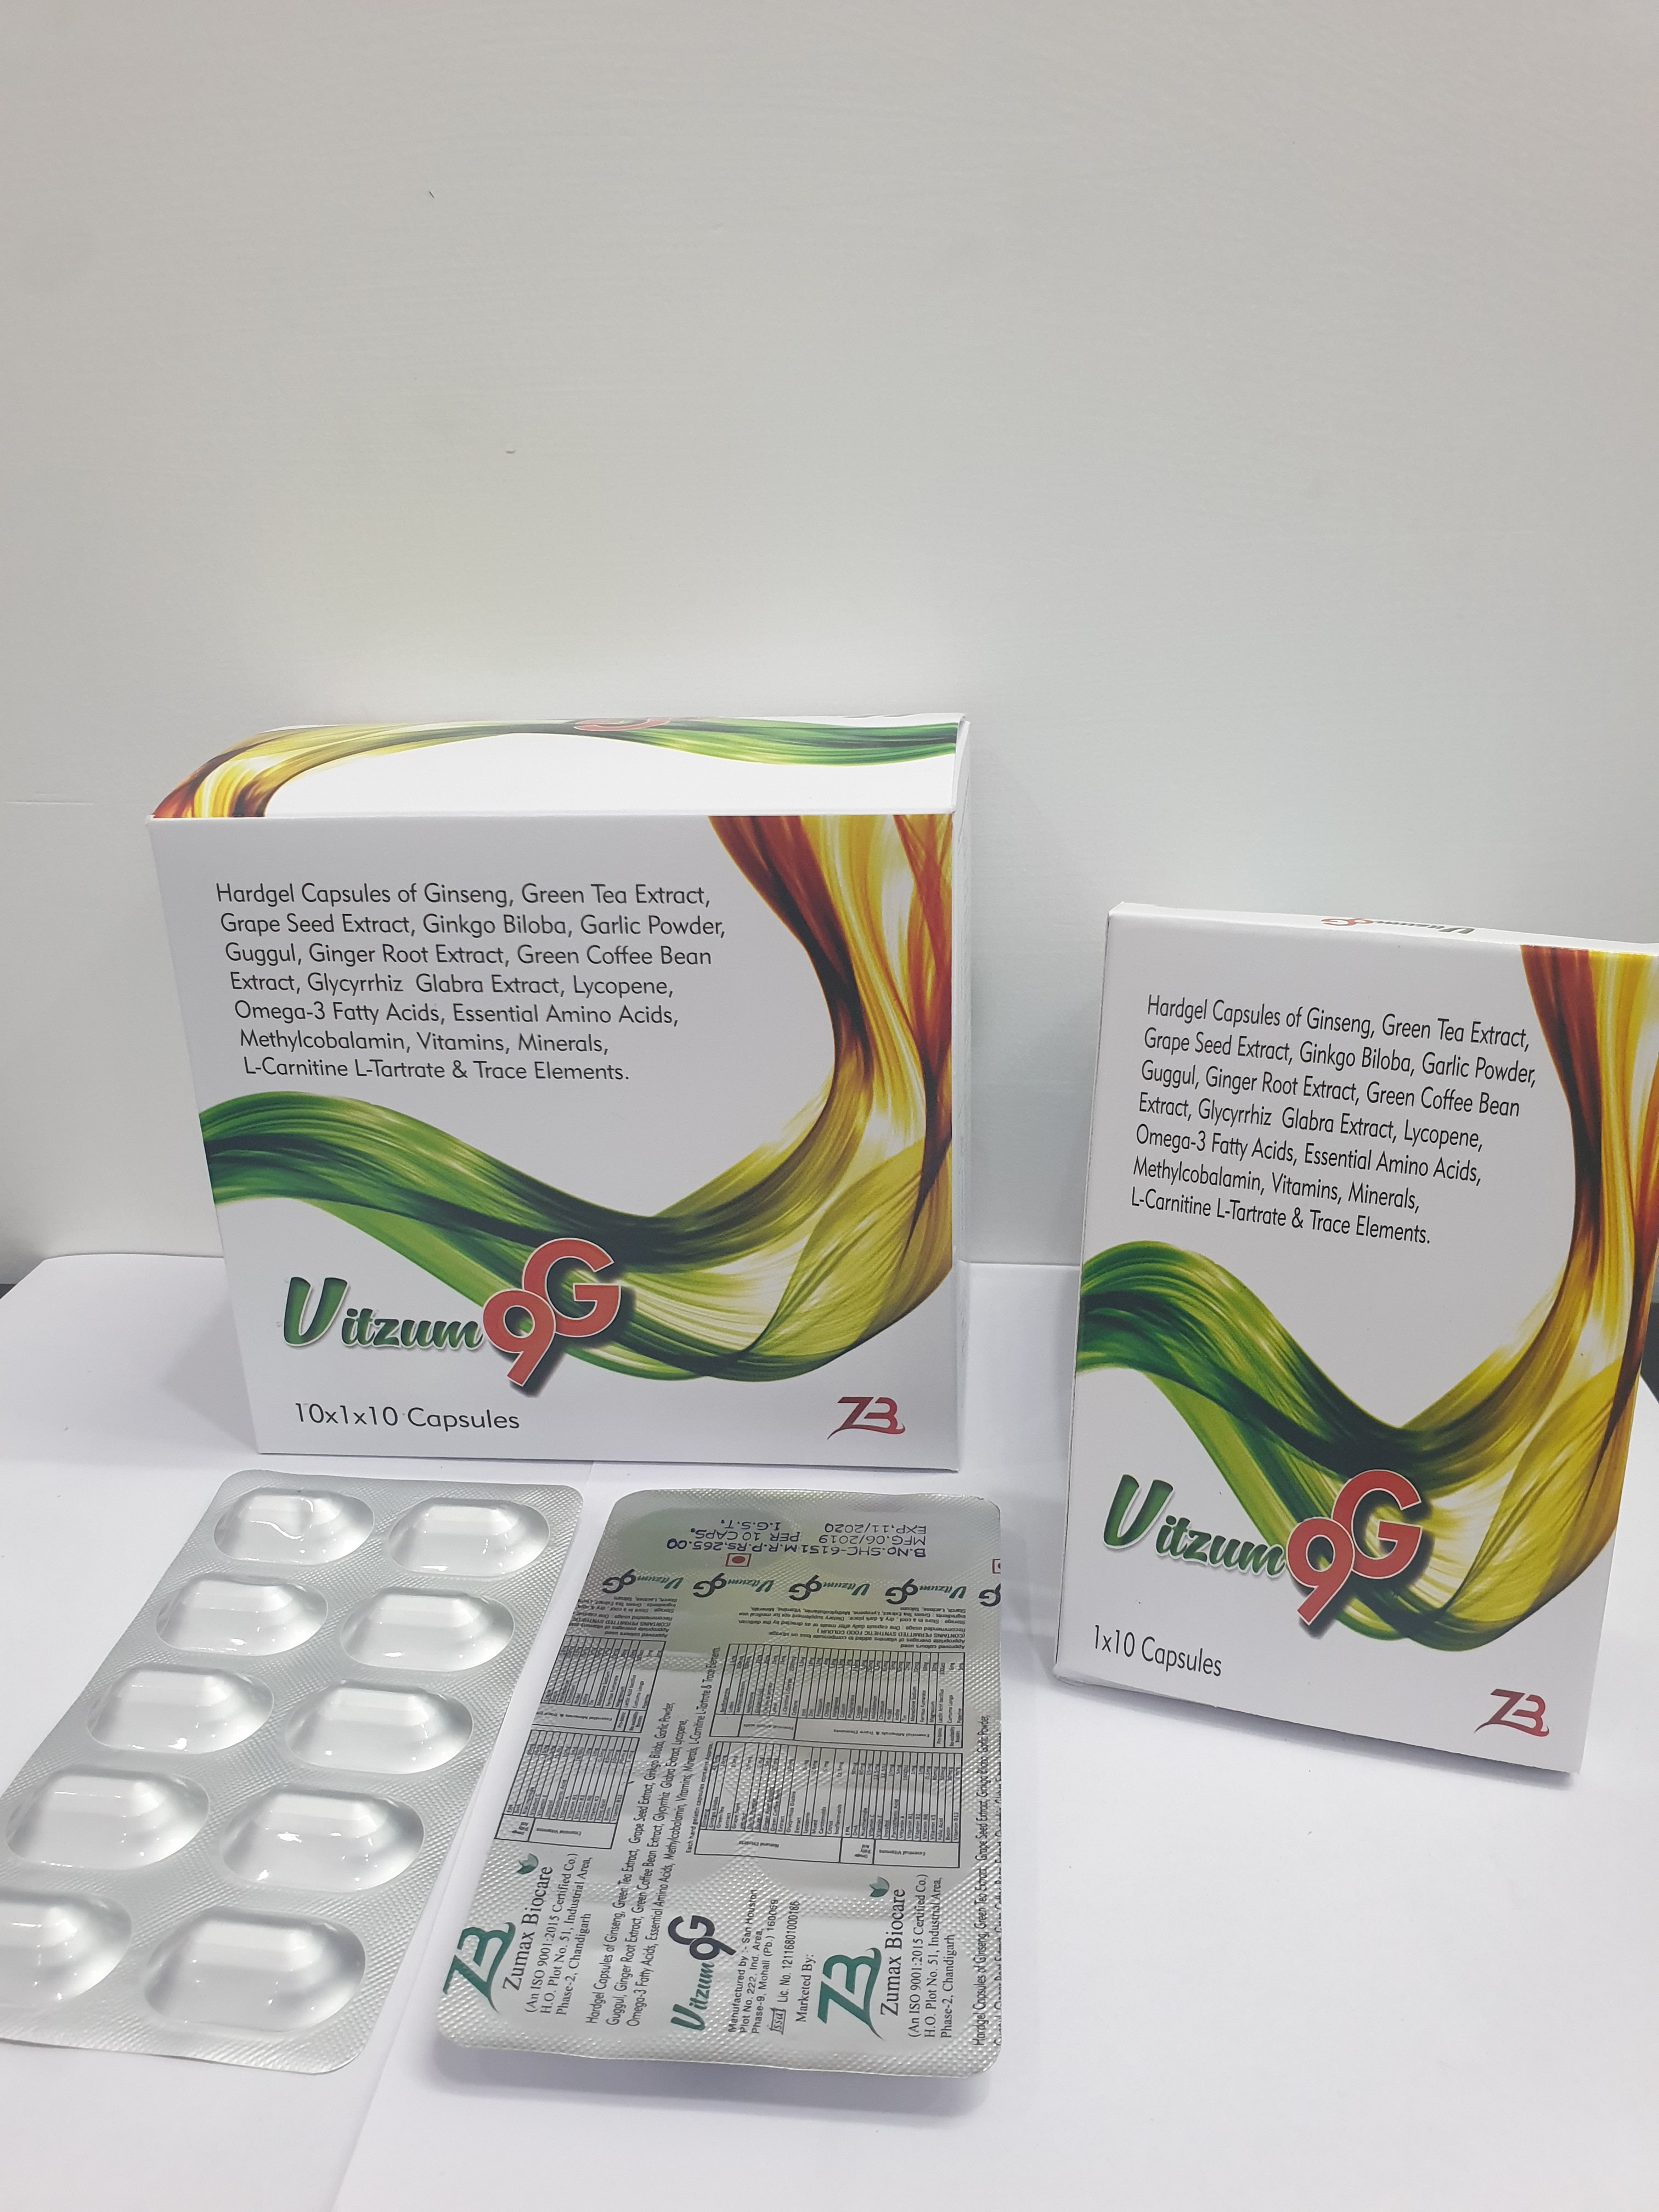 Product Name: Vitzum 9G, Compositions of Vitzum 9G are Hardgel Capsules of  Ginseng , Green Tea Extract, Grape Seed Extract , Ginkgo Biloba. Ginger Powder  Guggul,Ginger Root Extract,Green Coffee Bean Extract, Glycyrrhiz Glabra Extract,Lycopene Omega-3  Fatty Acids, Essential Ami - Zumax Biocare